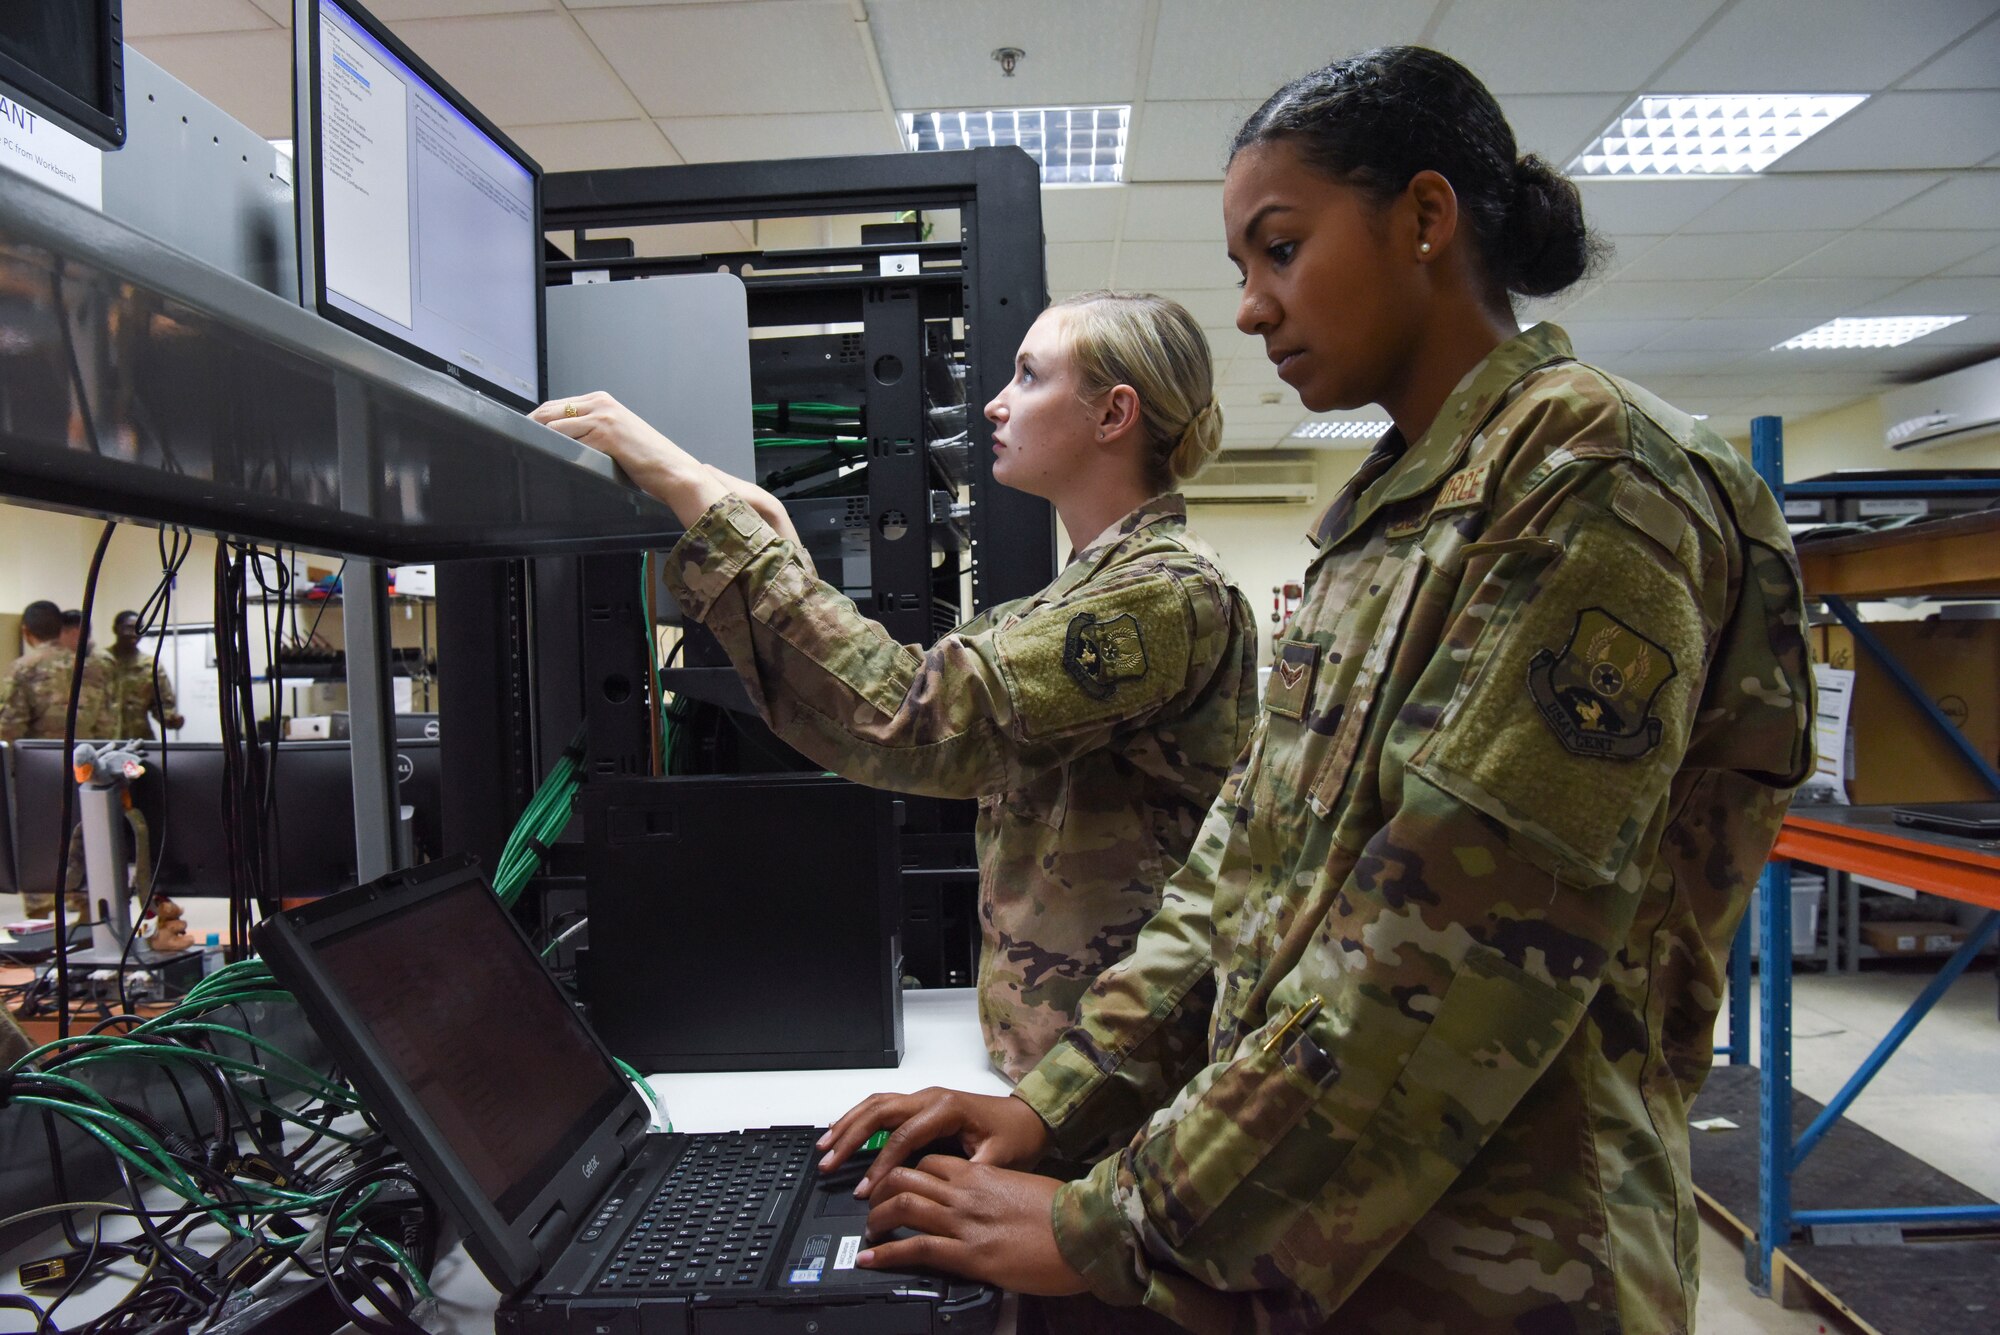 380th Expeditionary Communications Squadron client system technicians Senior Airman Ashley Yarbrough (middle) reimages a computer while Airman 1st Class Angela George (right) installs and updates software on a computer, Nov. 28, 2018 at Al Dhafra Air Base, United Arab Emirates.